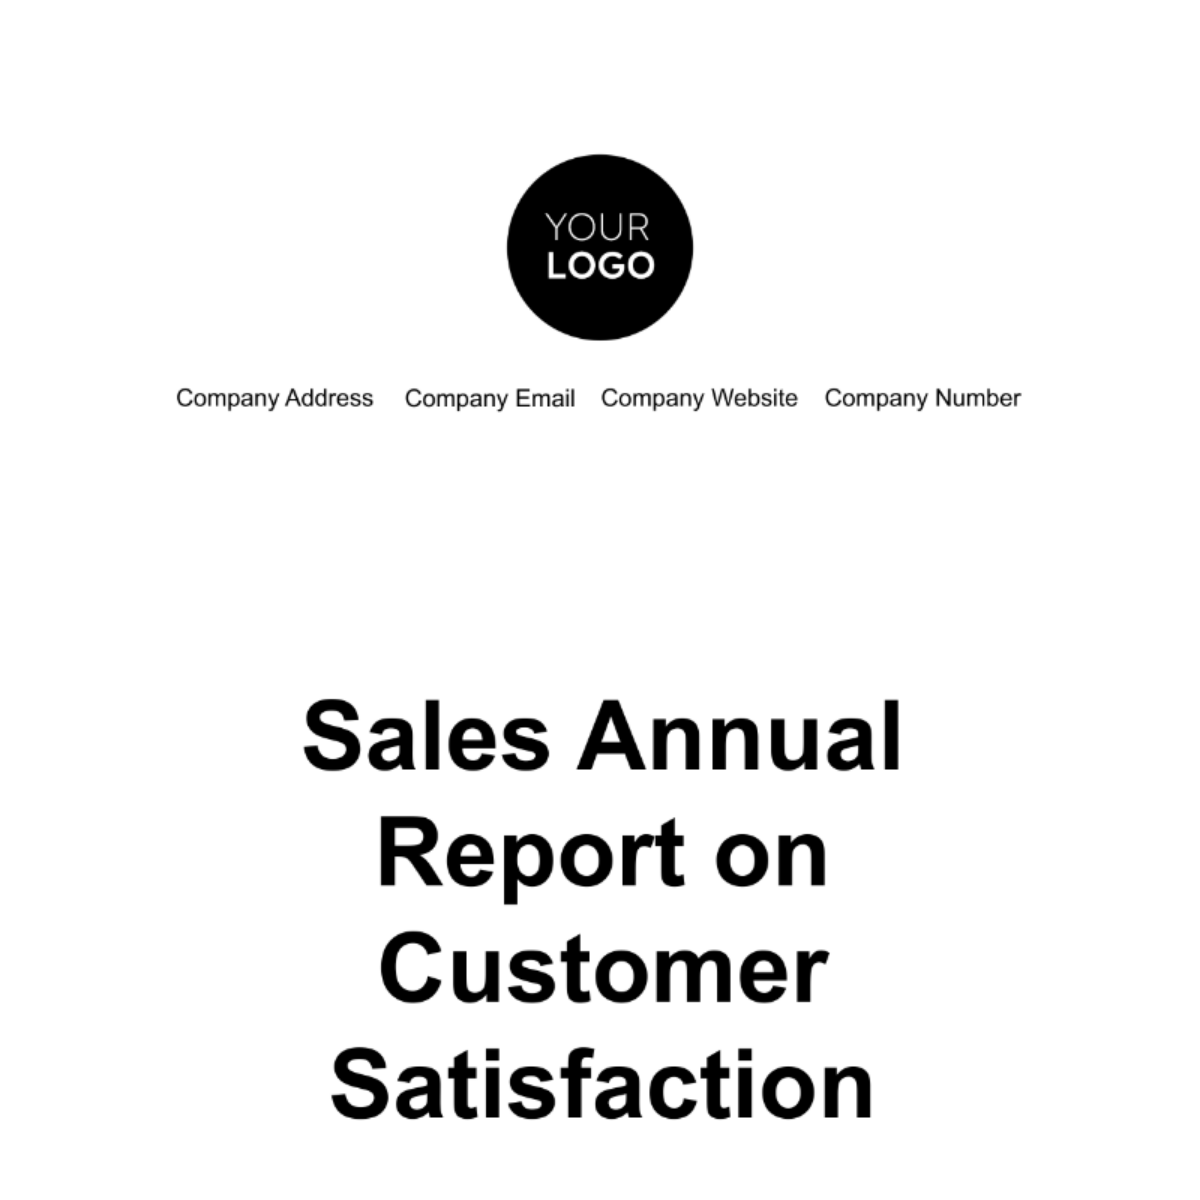 Free Sales Annual Report on Customer Satisfaction Template